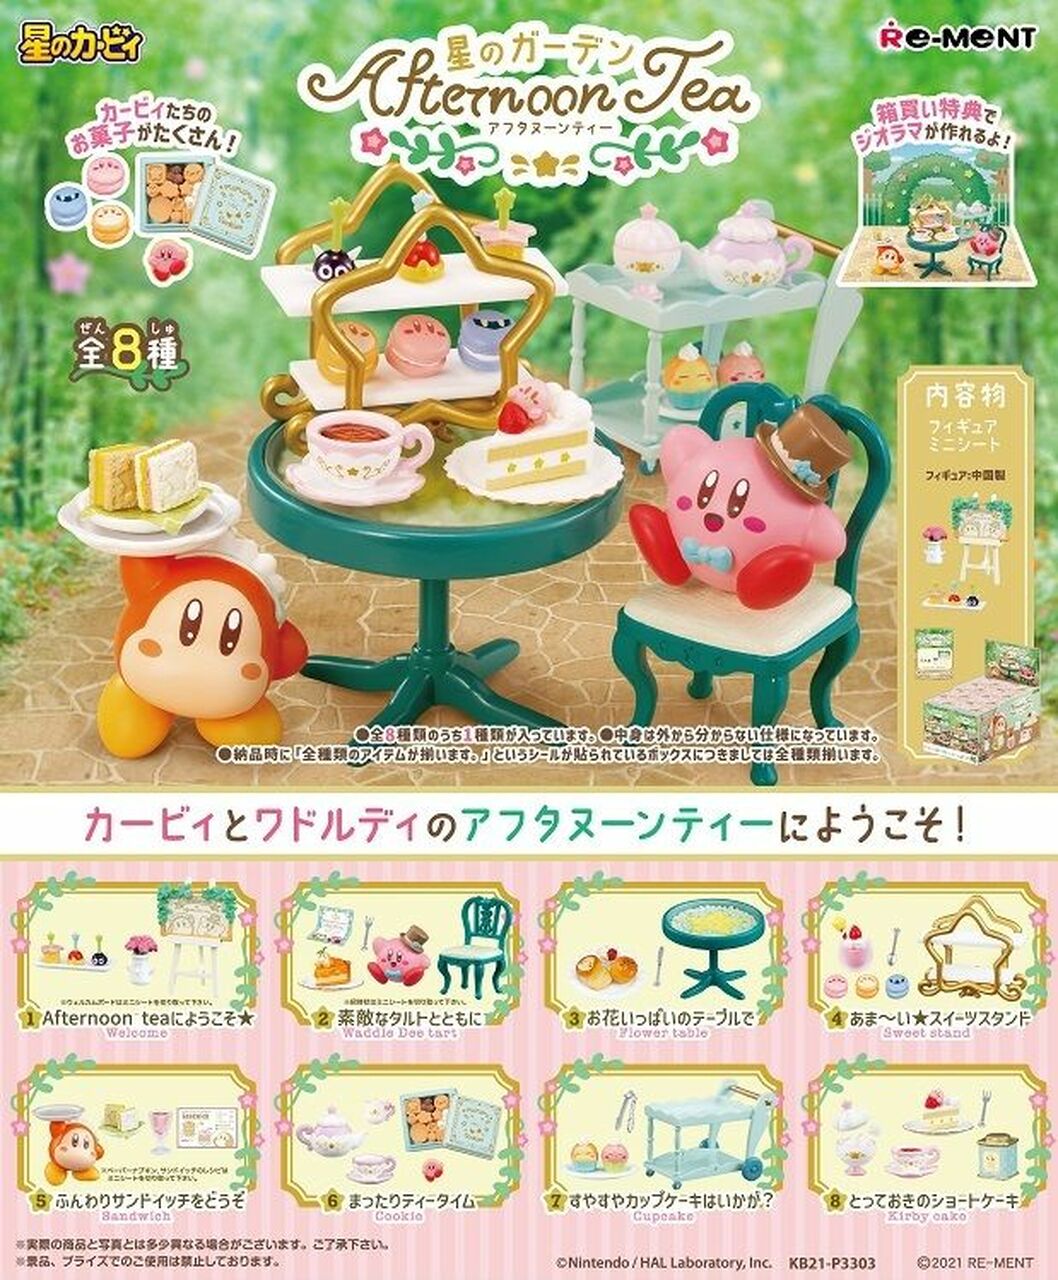 Re-ment Kirby Afternoon Tea Blind Box (1 Blind Box)